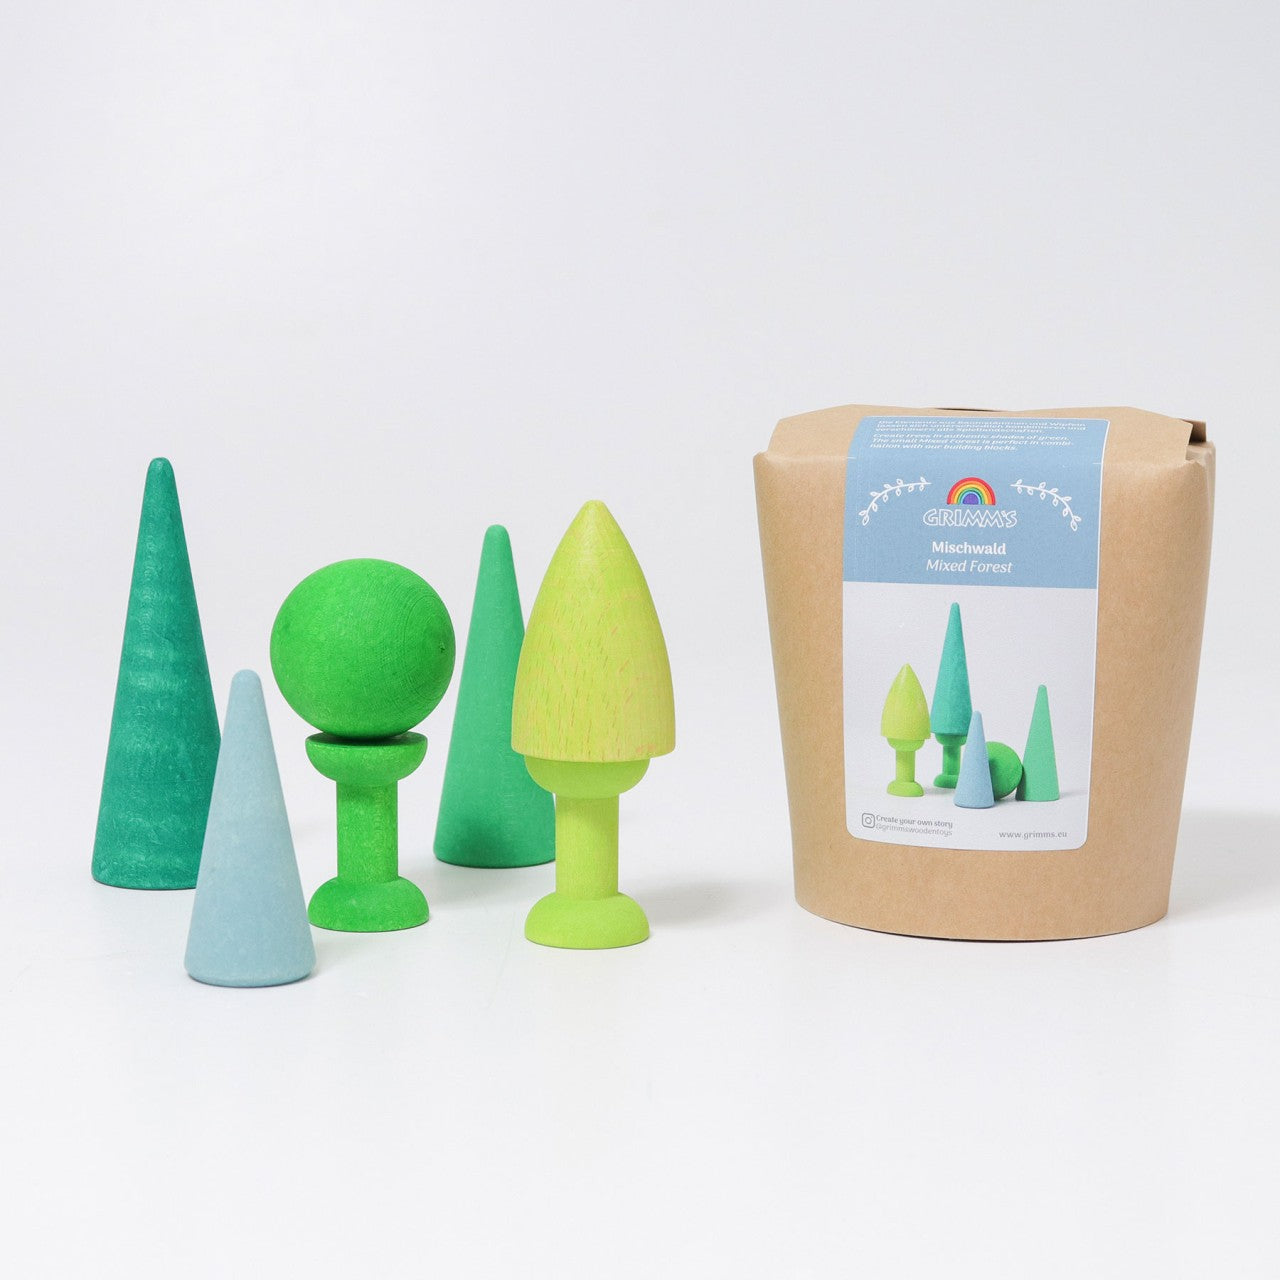 Mixed Forest | Open-Ended Toys